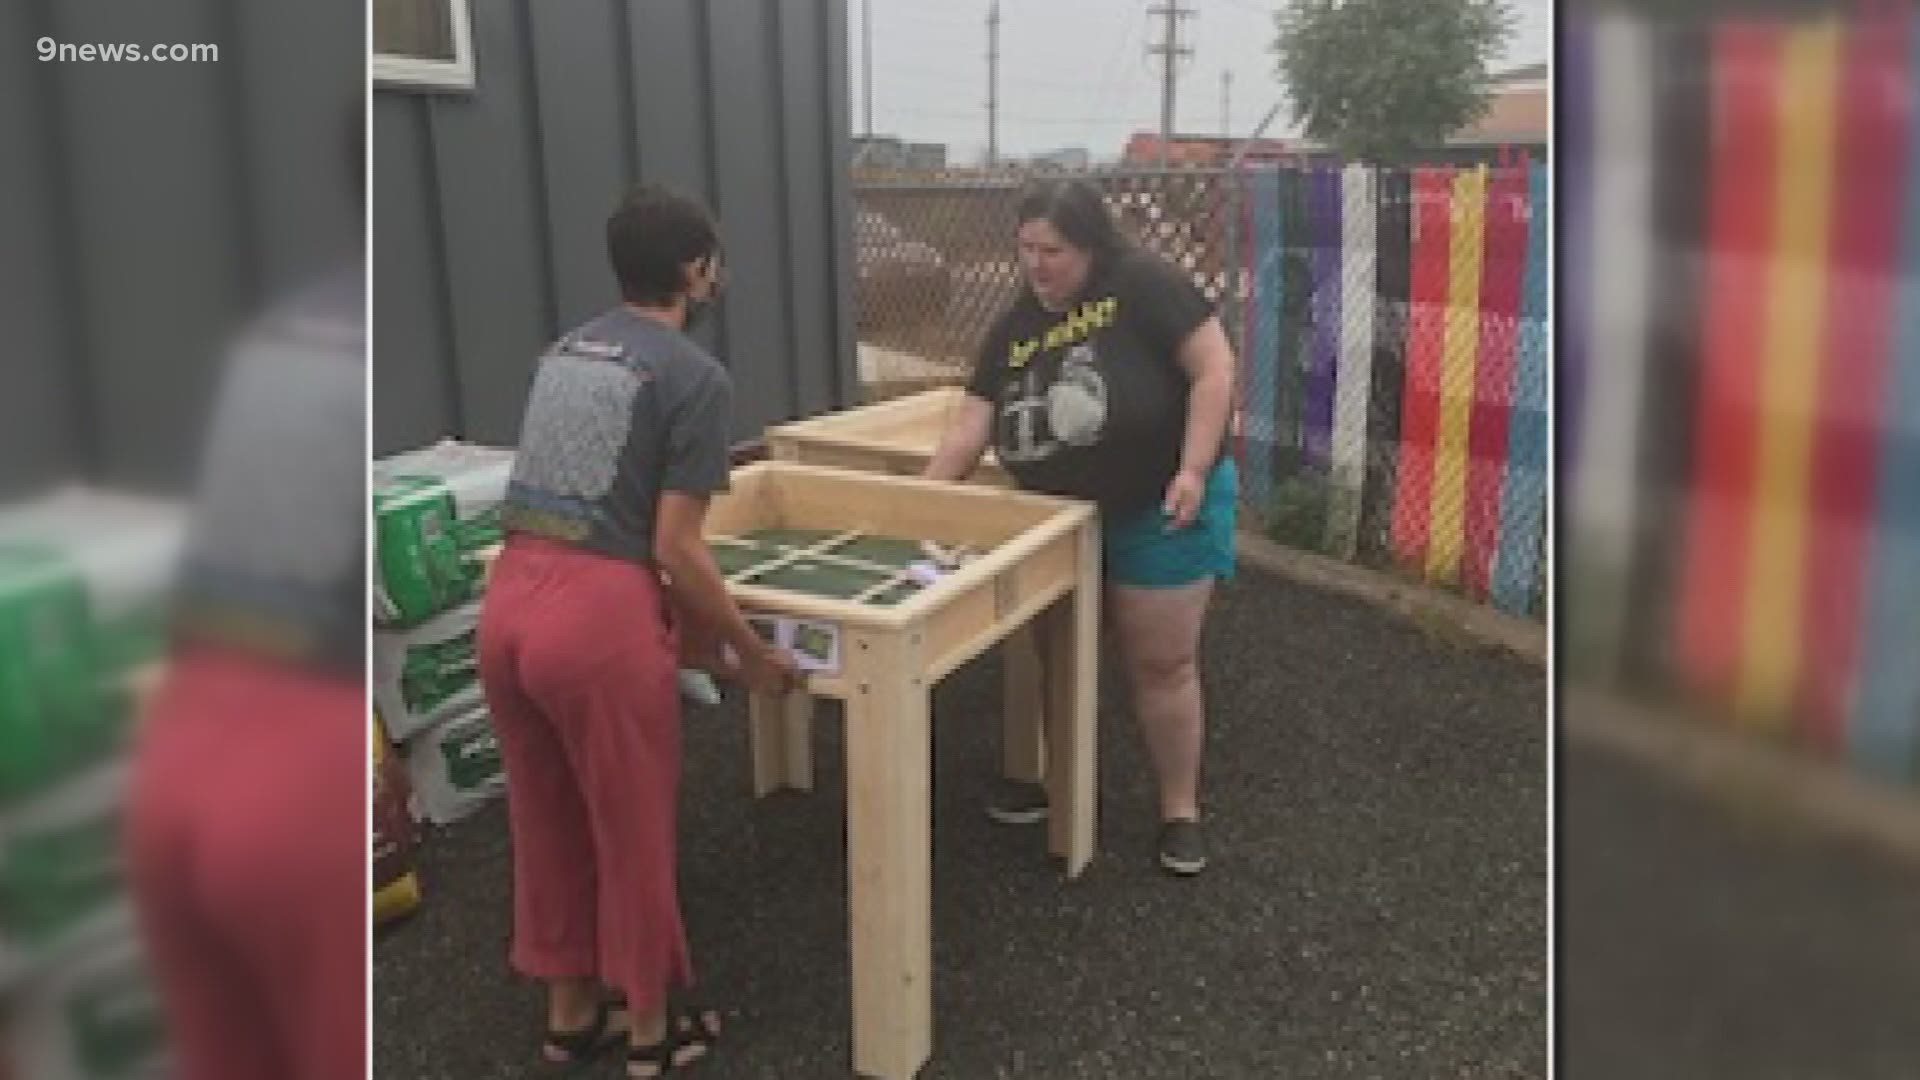 A local square foot gardening specialist and her team are installing gardens at the Globeville Tiny Home Village to help residents become food self-sufficient.